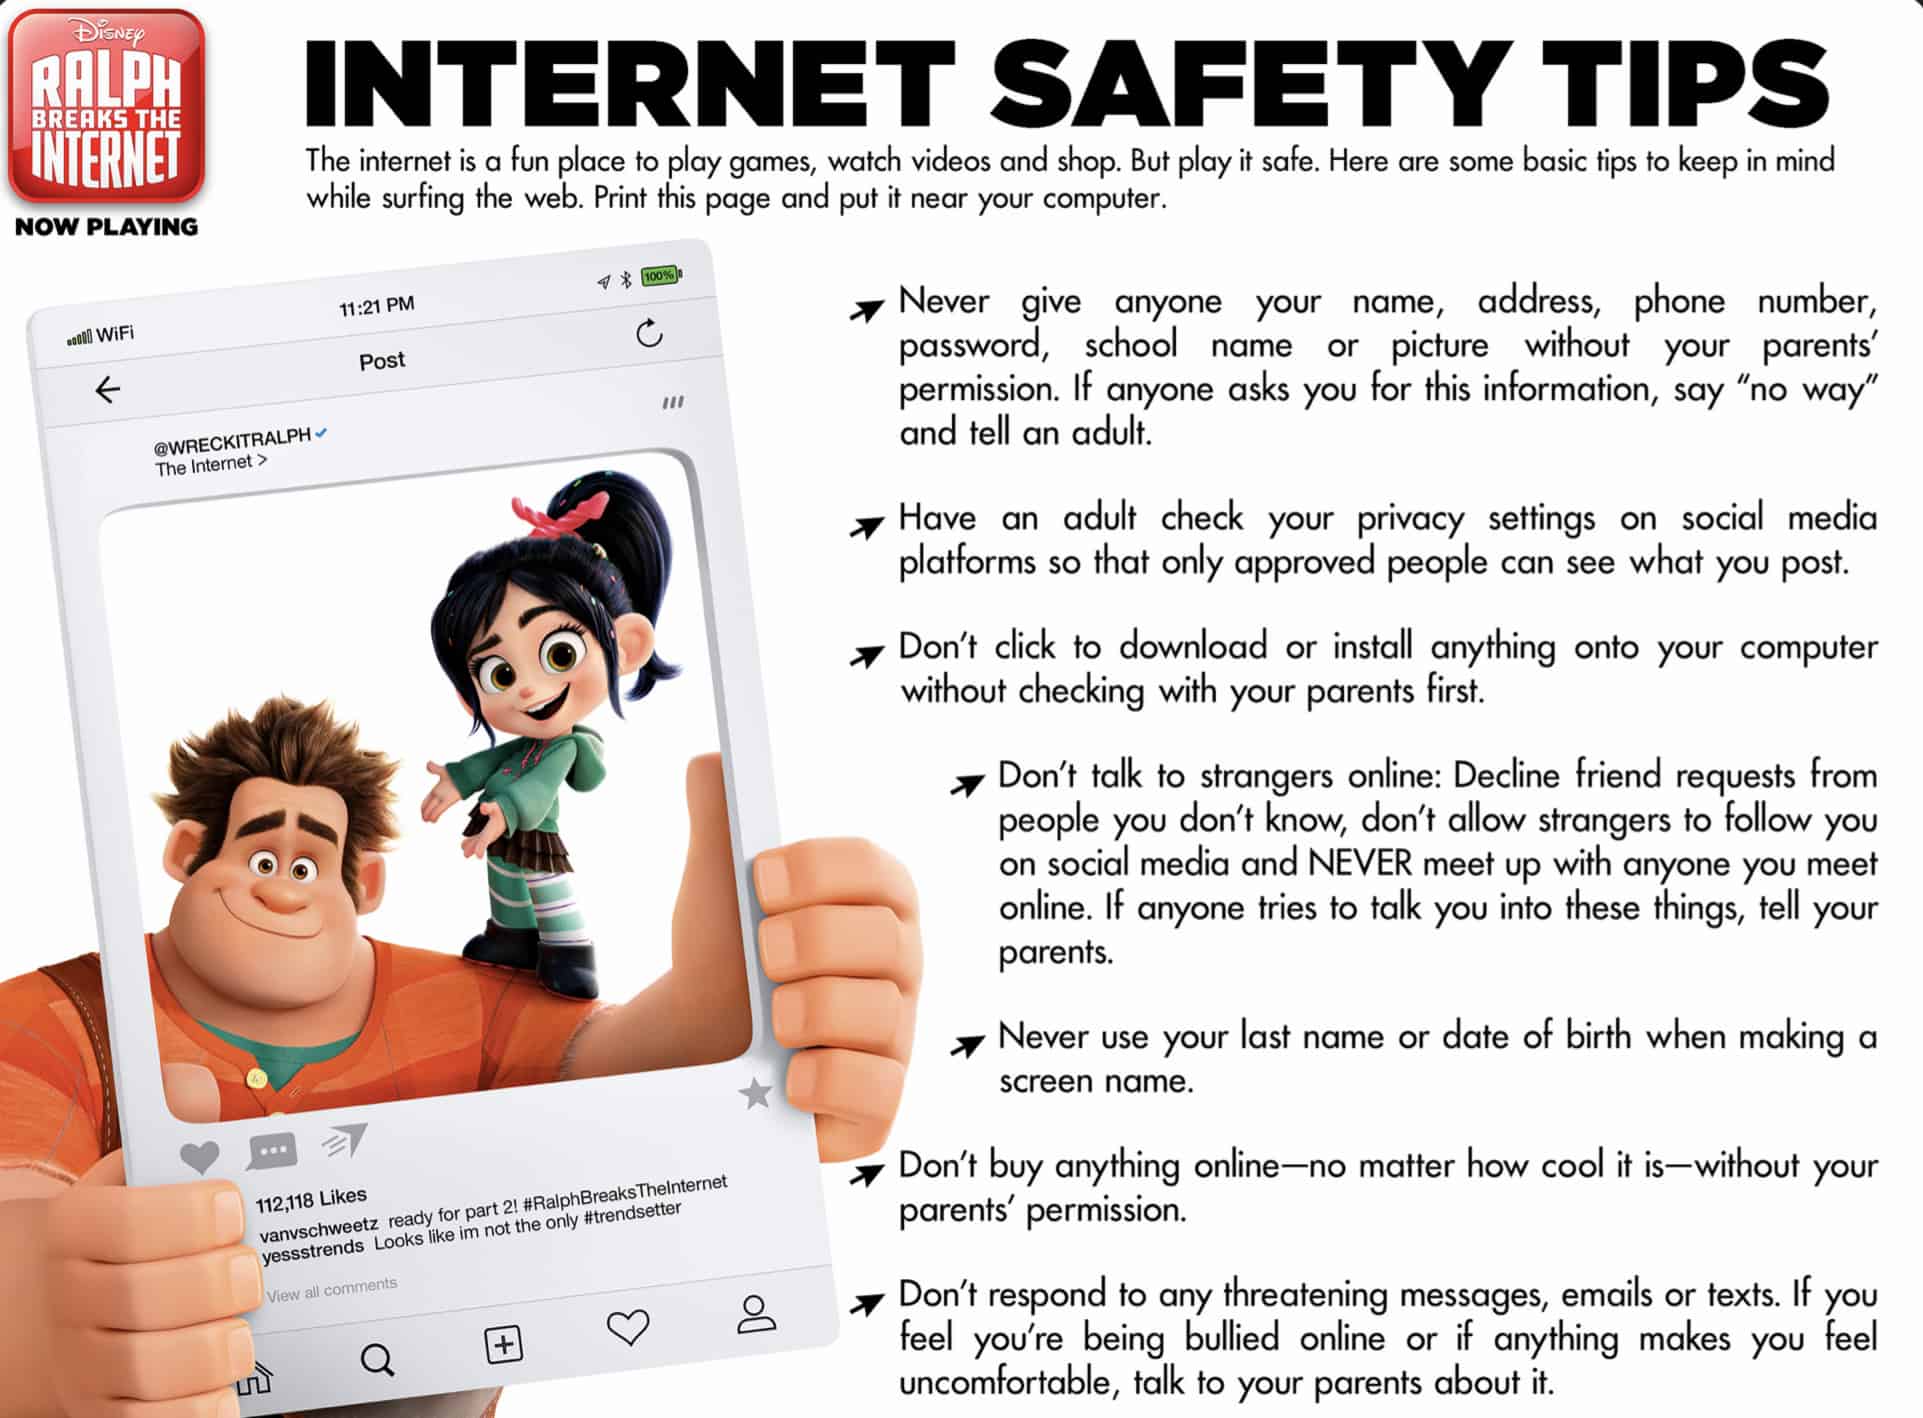 Internet Safety Tips from Disney's Ralph Breaks the Internet